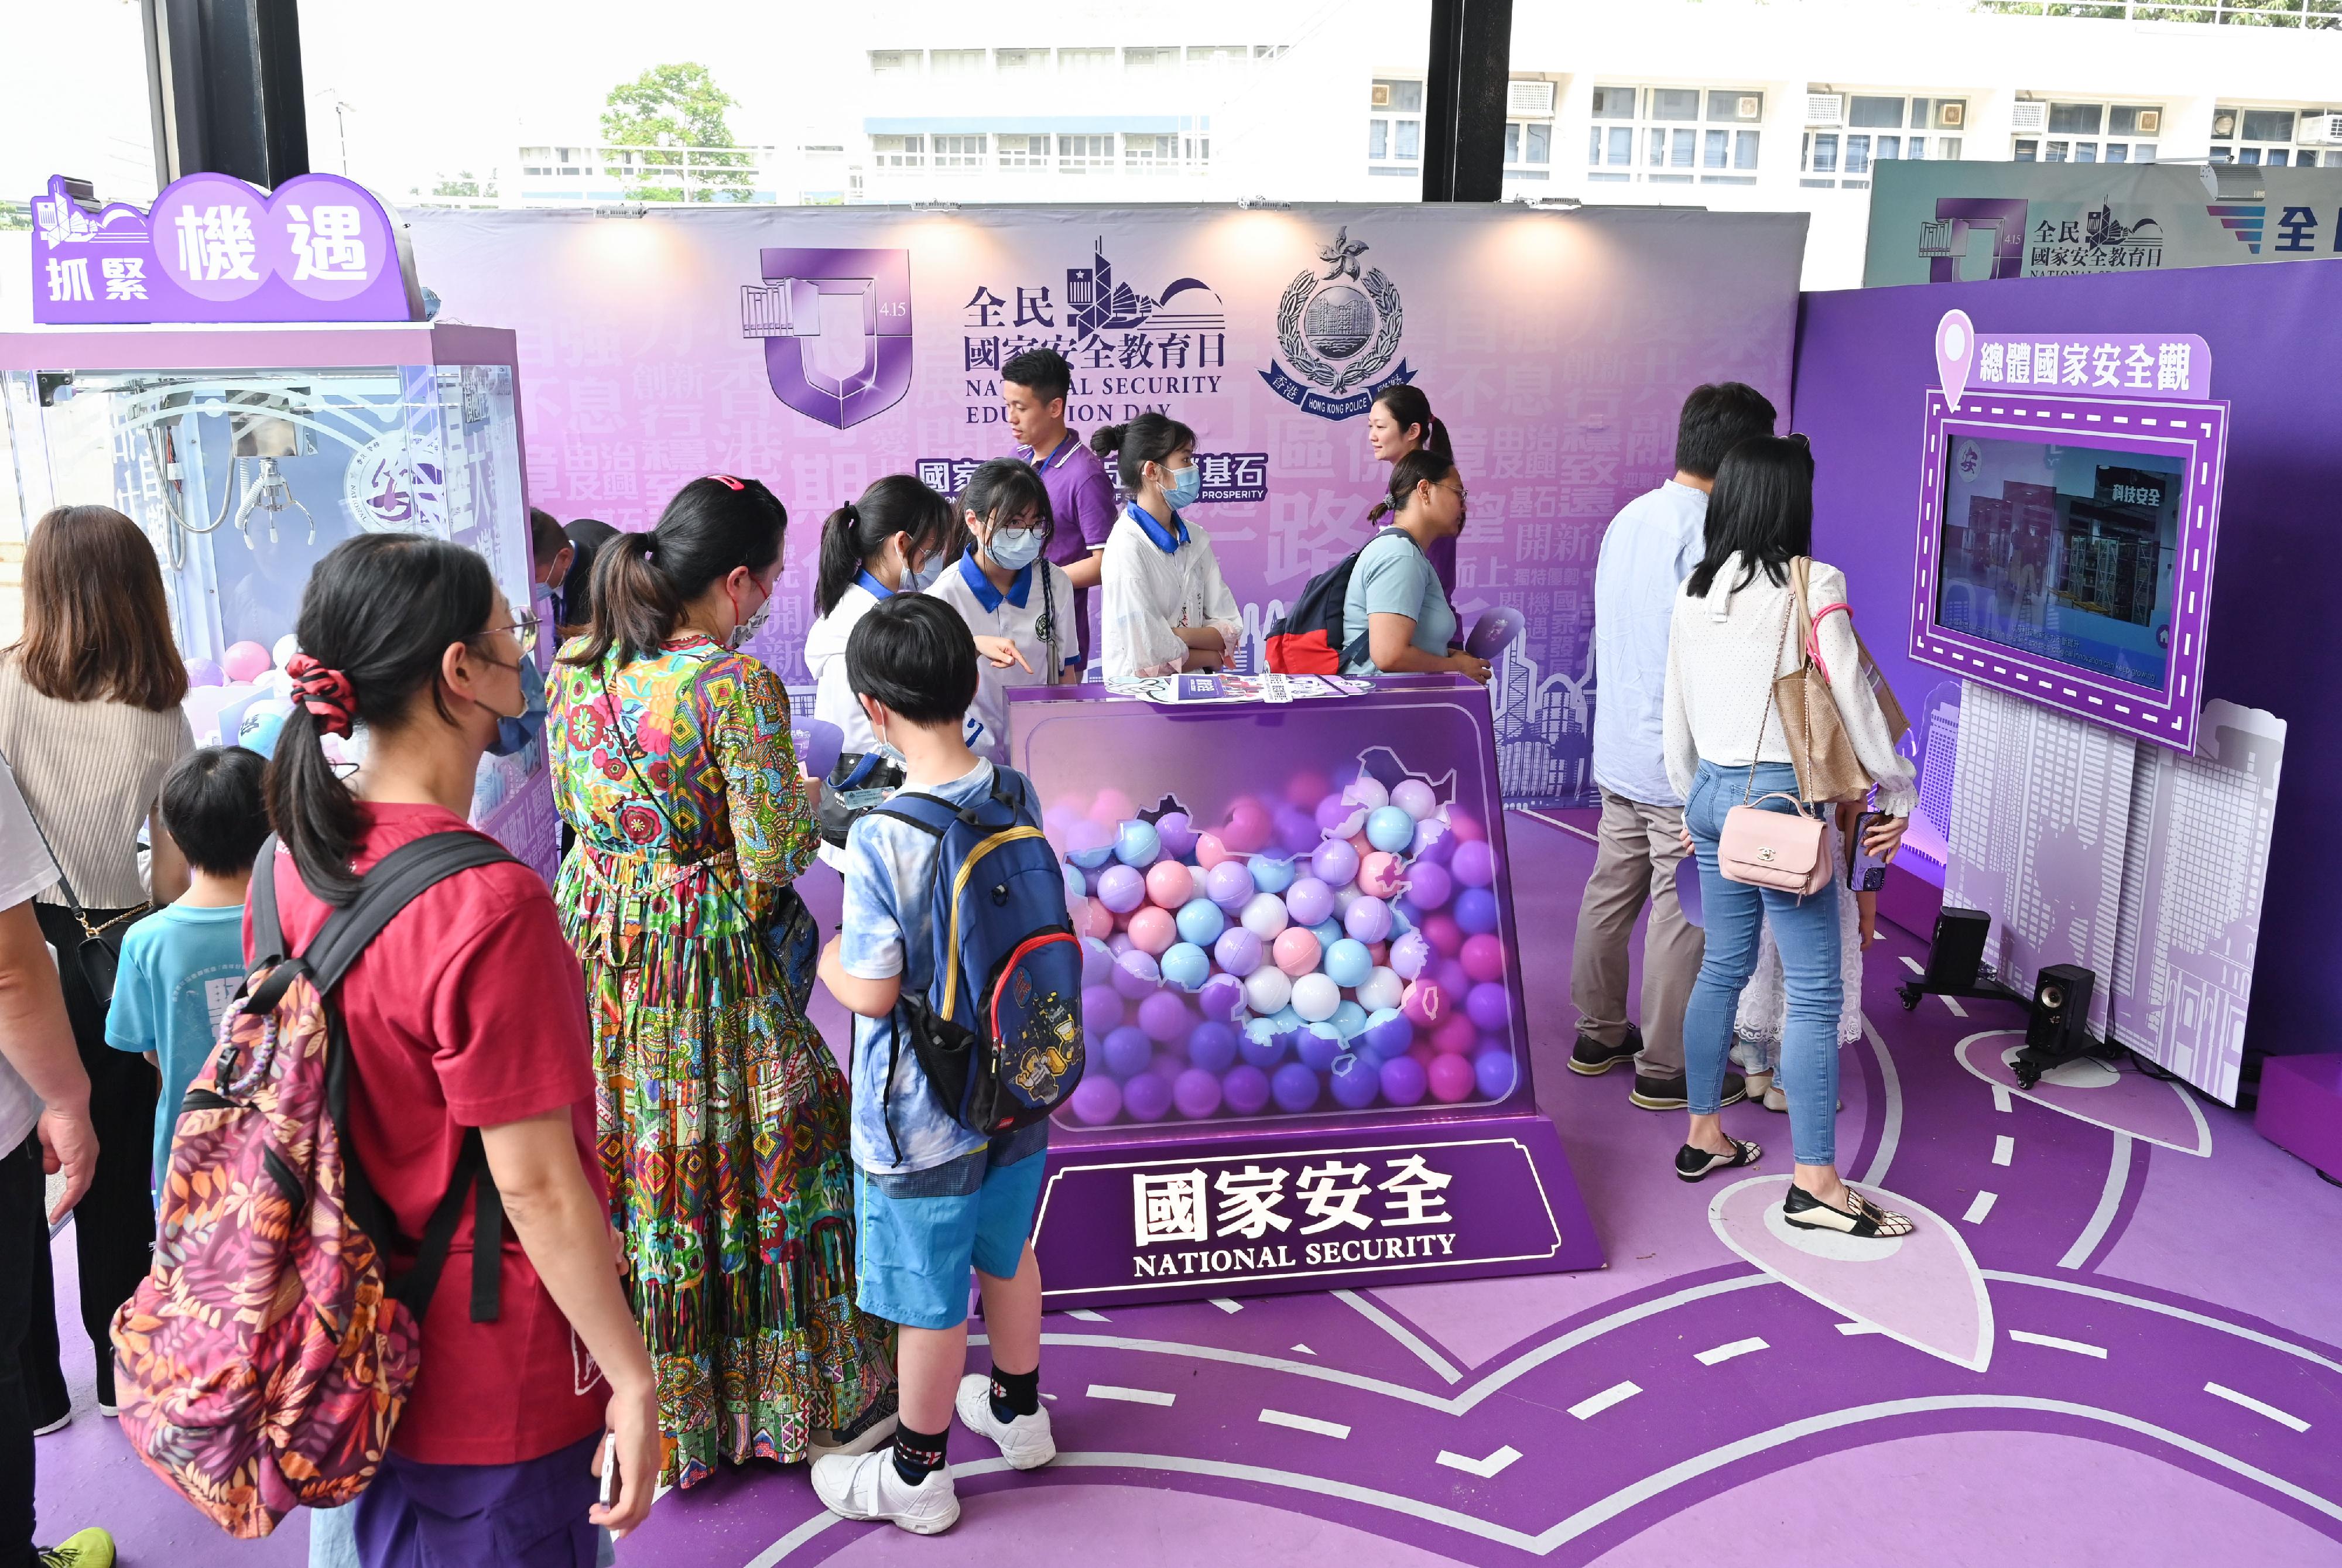 The Police Force held an open day in support of the National Security Education Day at Hong Kong Police College today (April 15). Photo shows participants touring an exhibition on national security education.